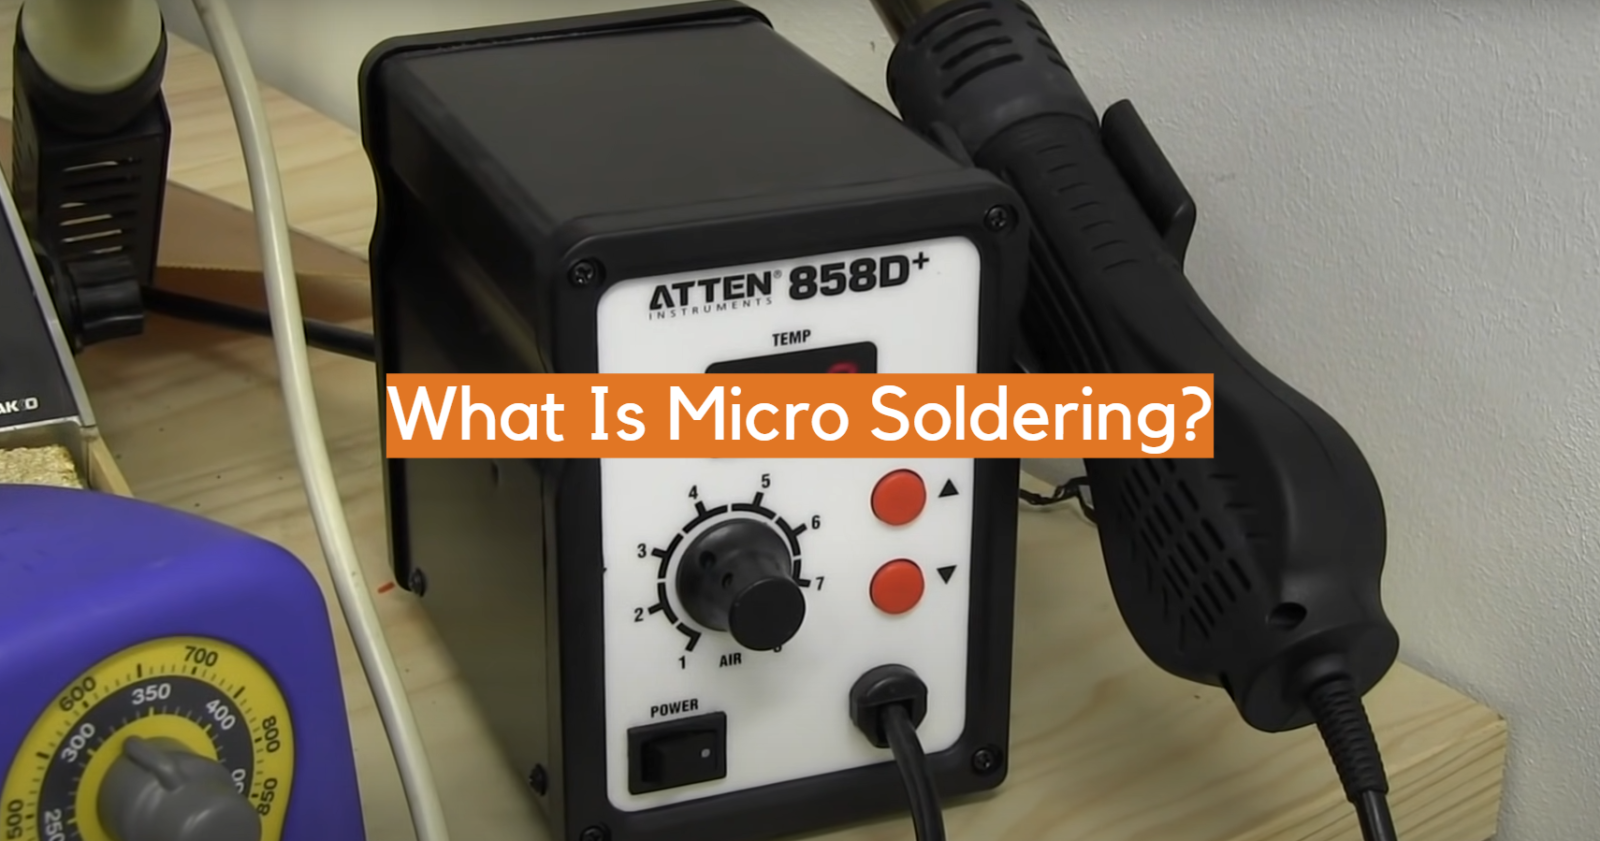 What Is Micro Soldering?